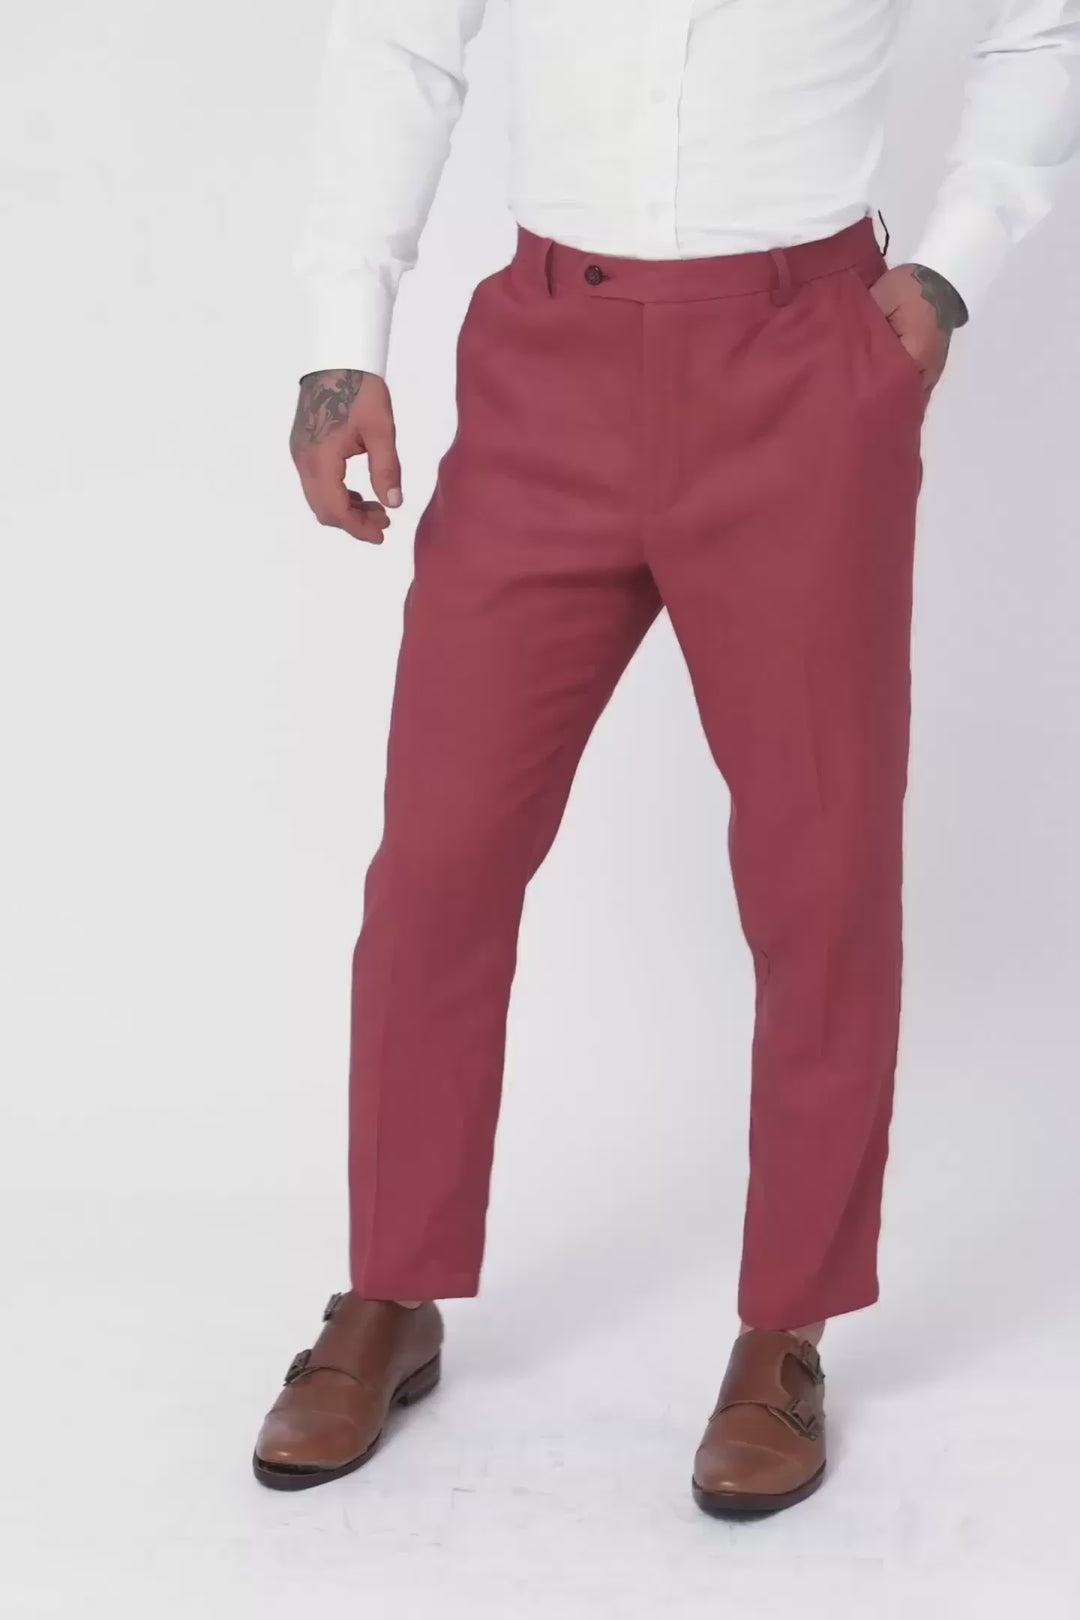 Tuscan Red Linen Pants